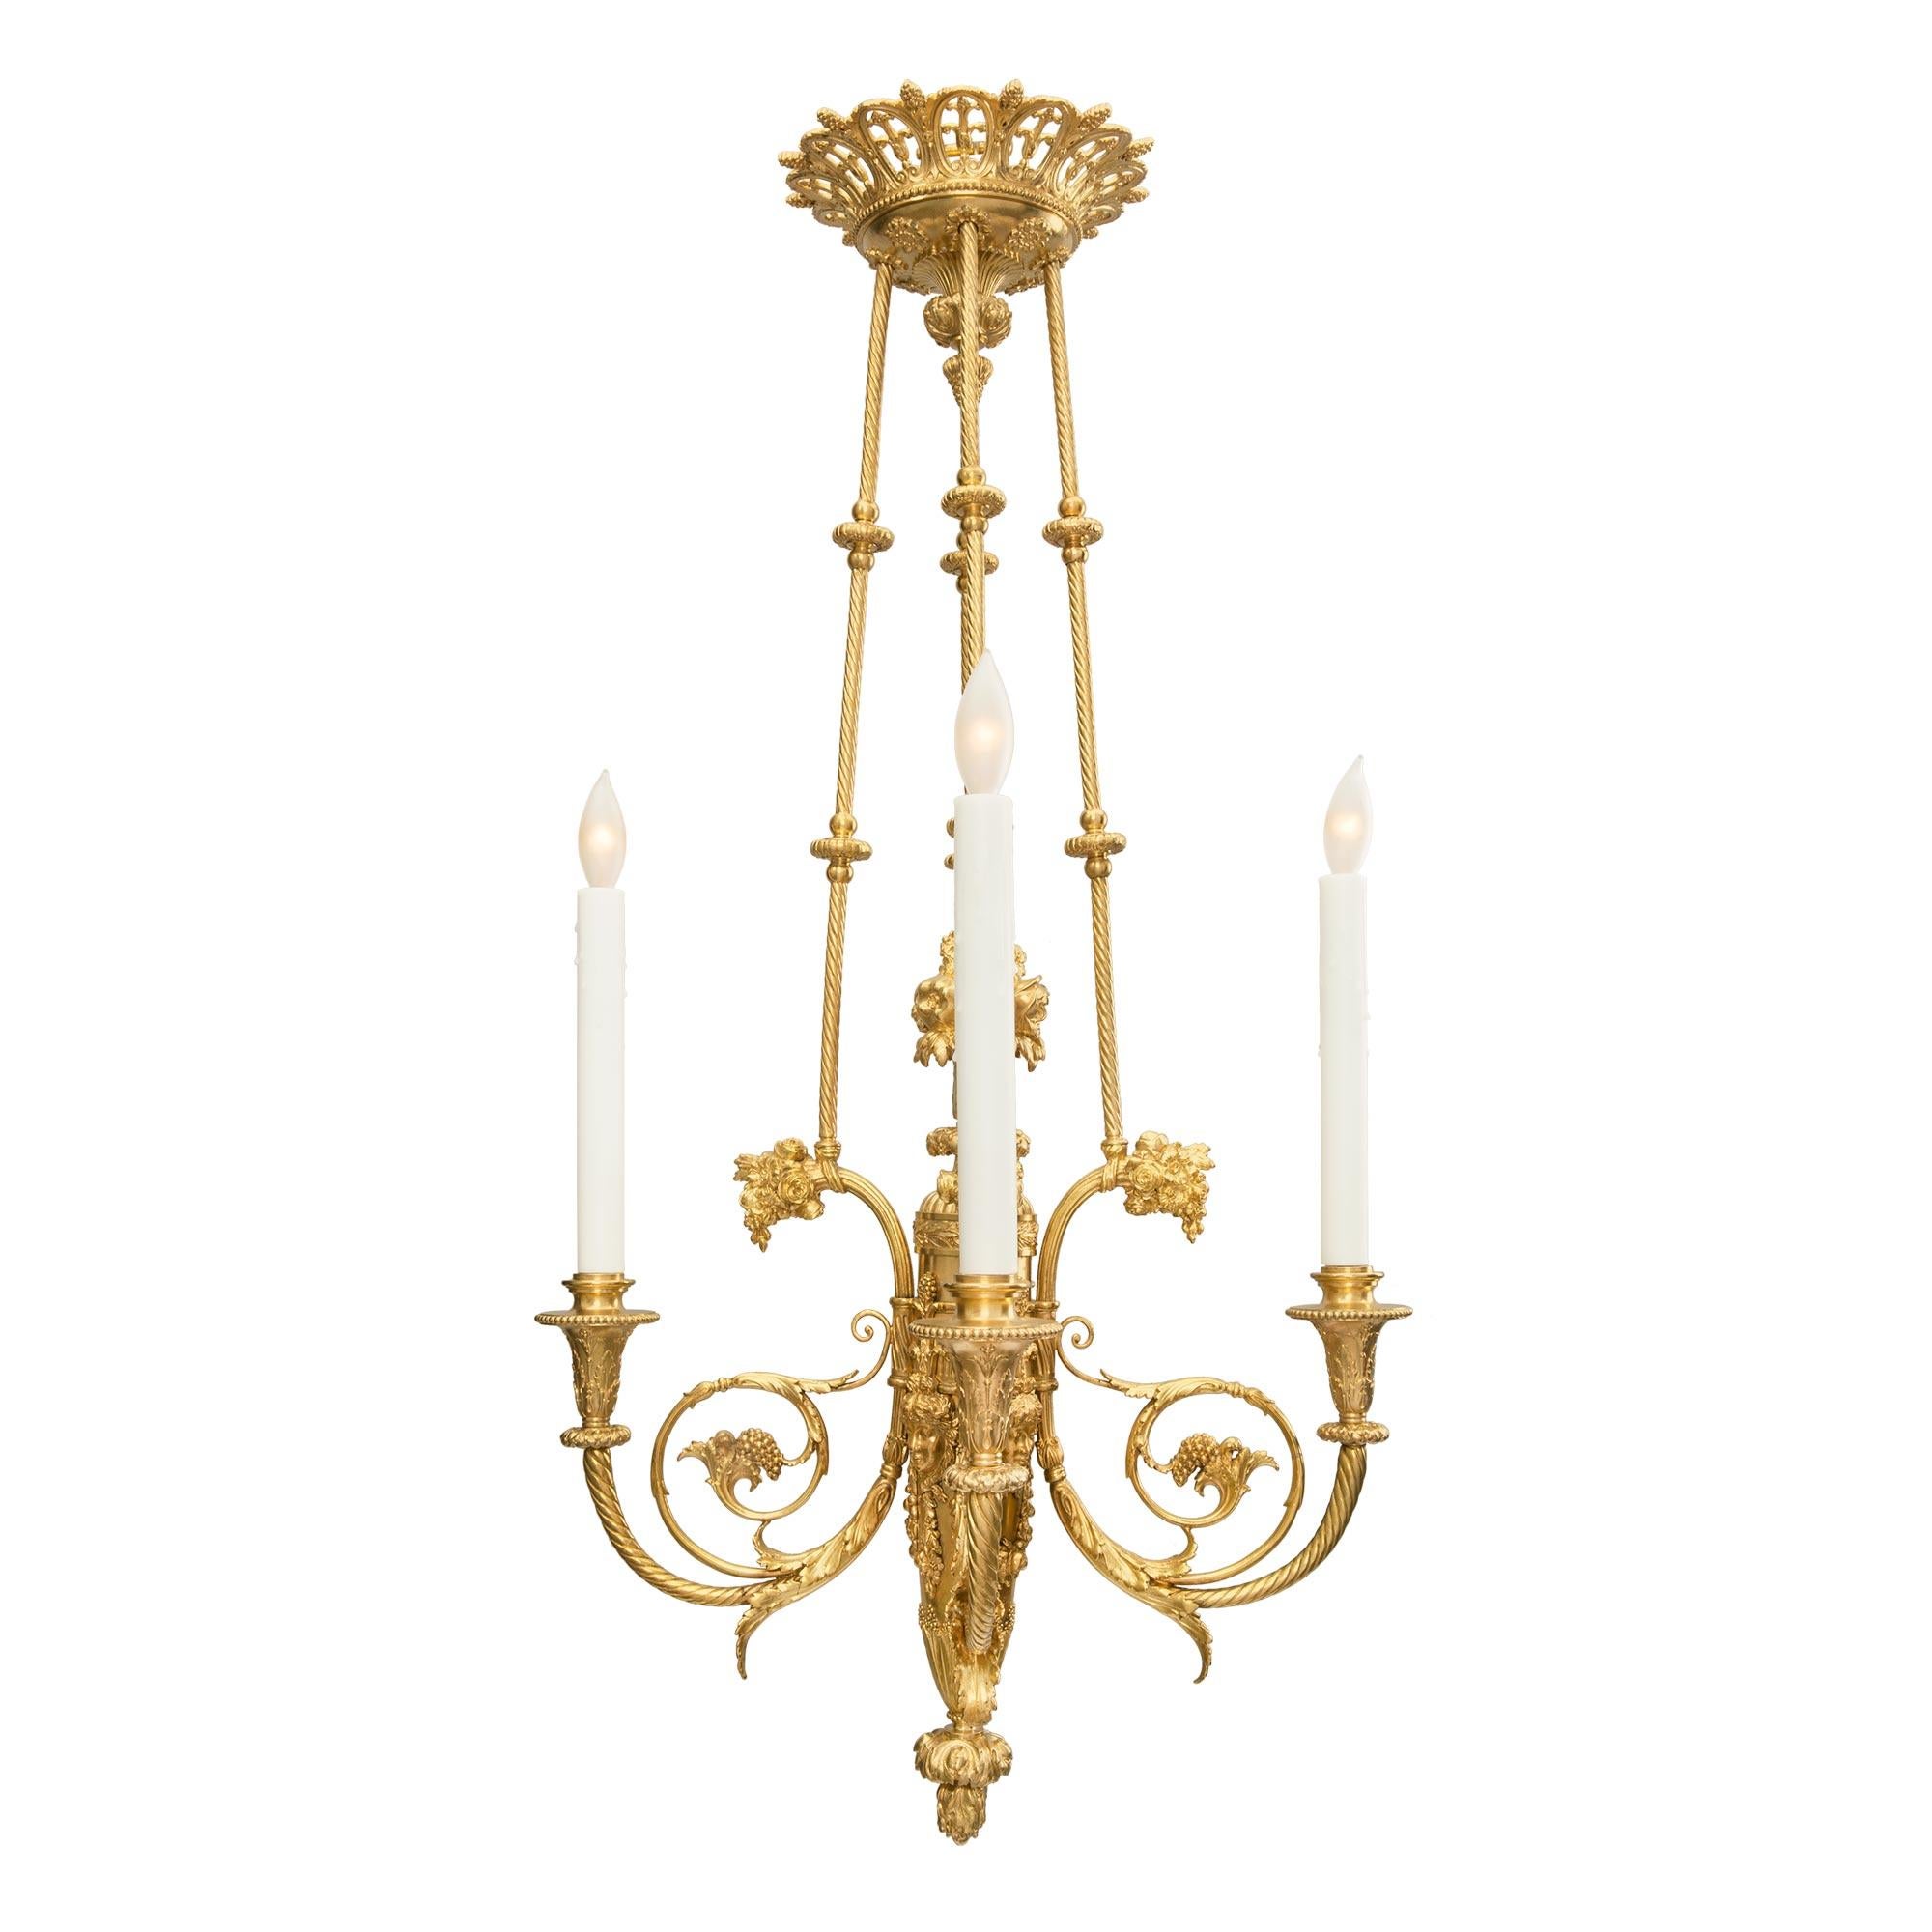 An extremely elegant and high quality French 19th century Louis XVI st. ormolu four arm chandelier signed F. BARBEDIENNE PARIS. The chandelier is centered by a beautiful berried foliate inverted bottom finial below lovely laurel leaves. The striking